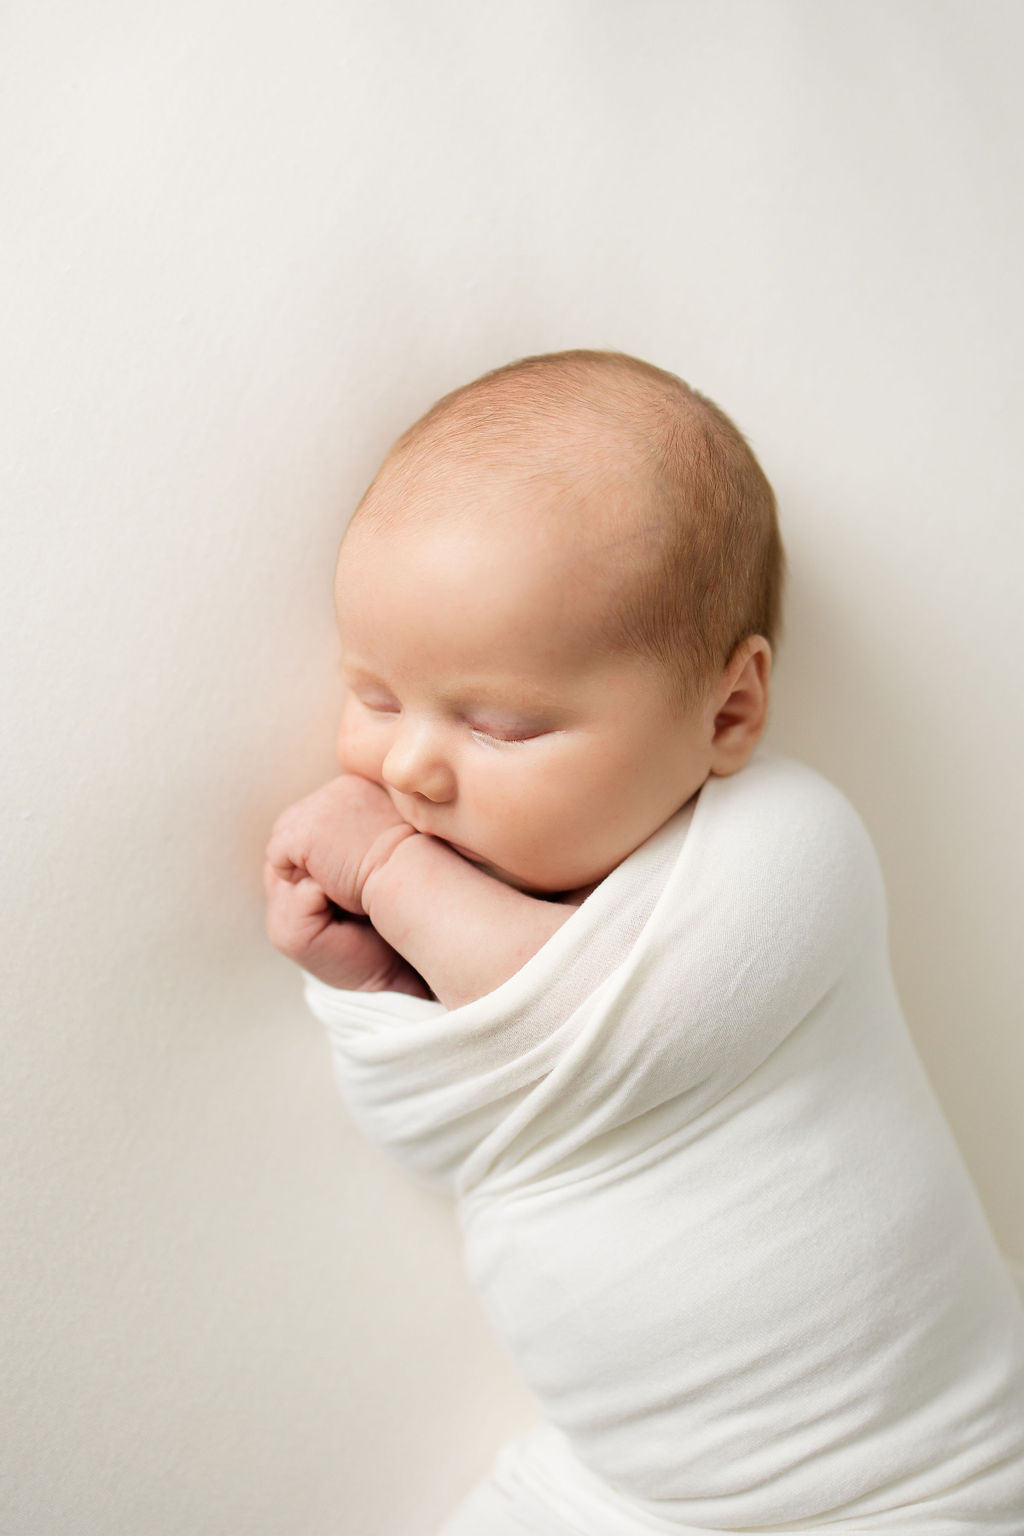 A newborn baby sleeps in a tight white swaddle with hands out